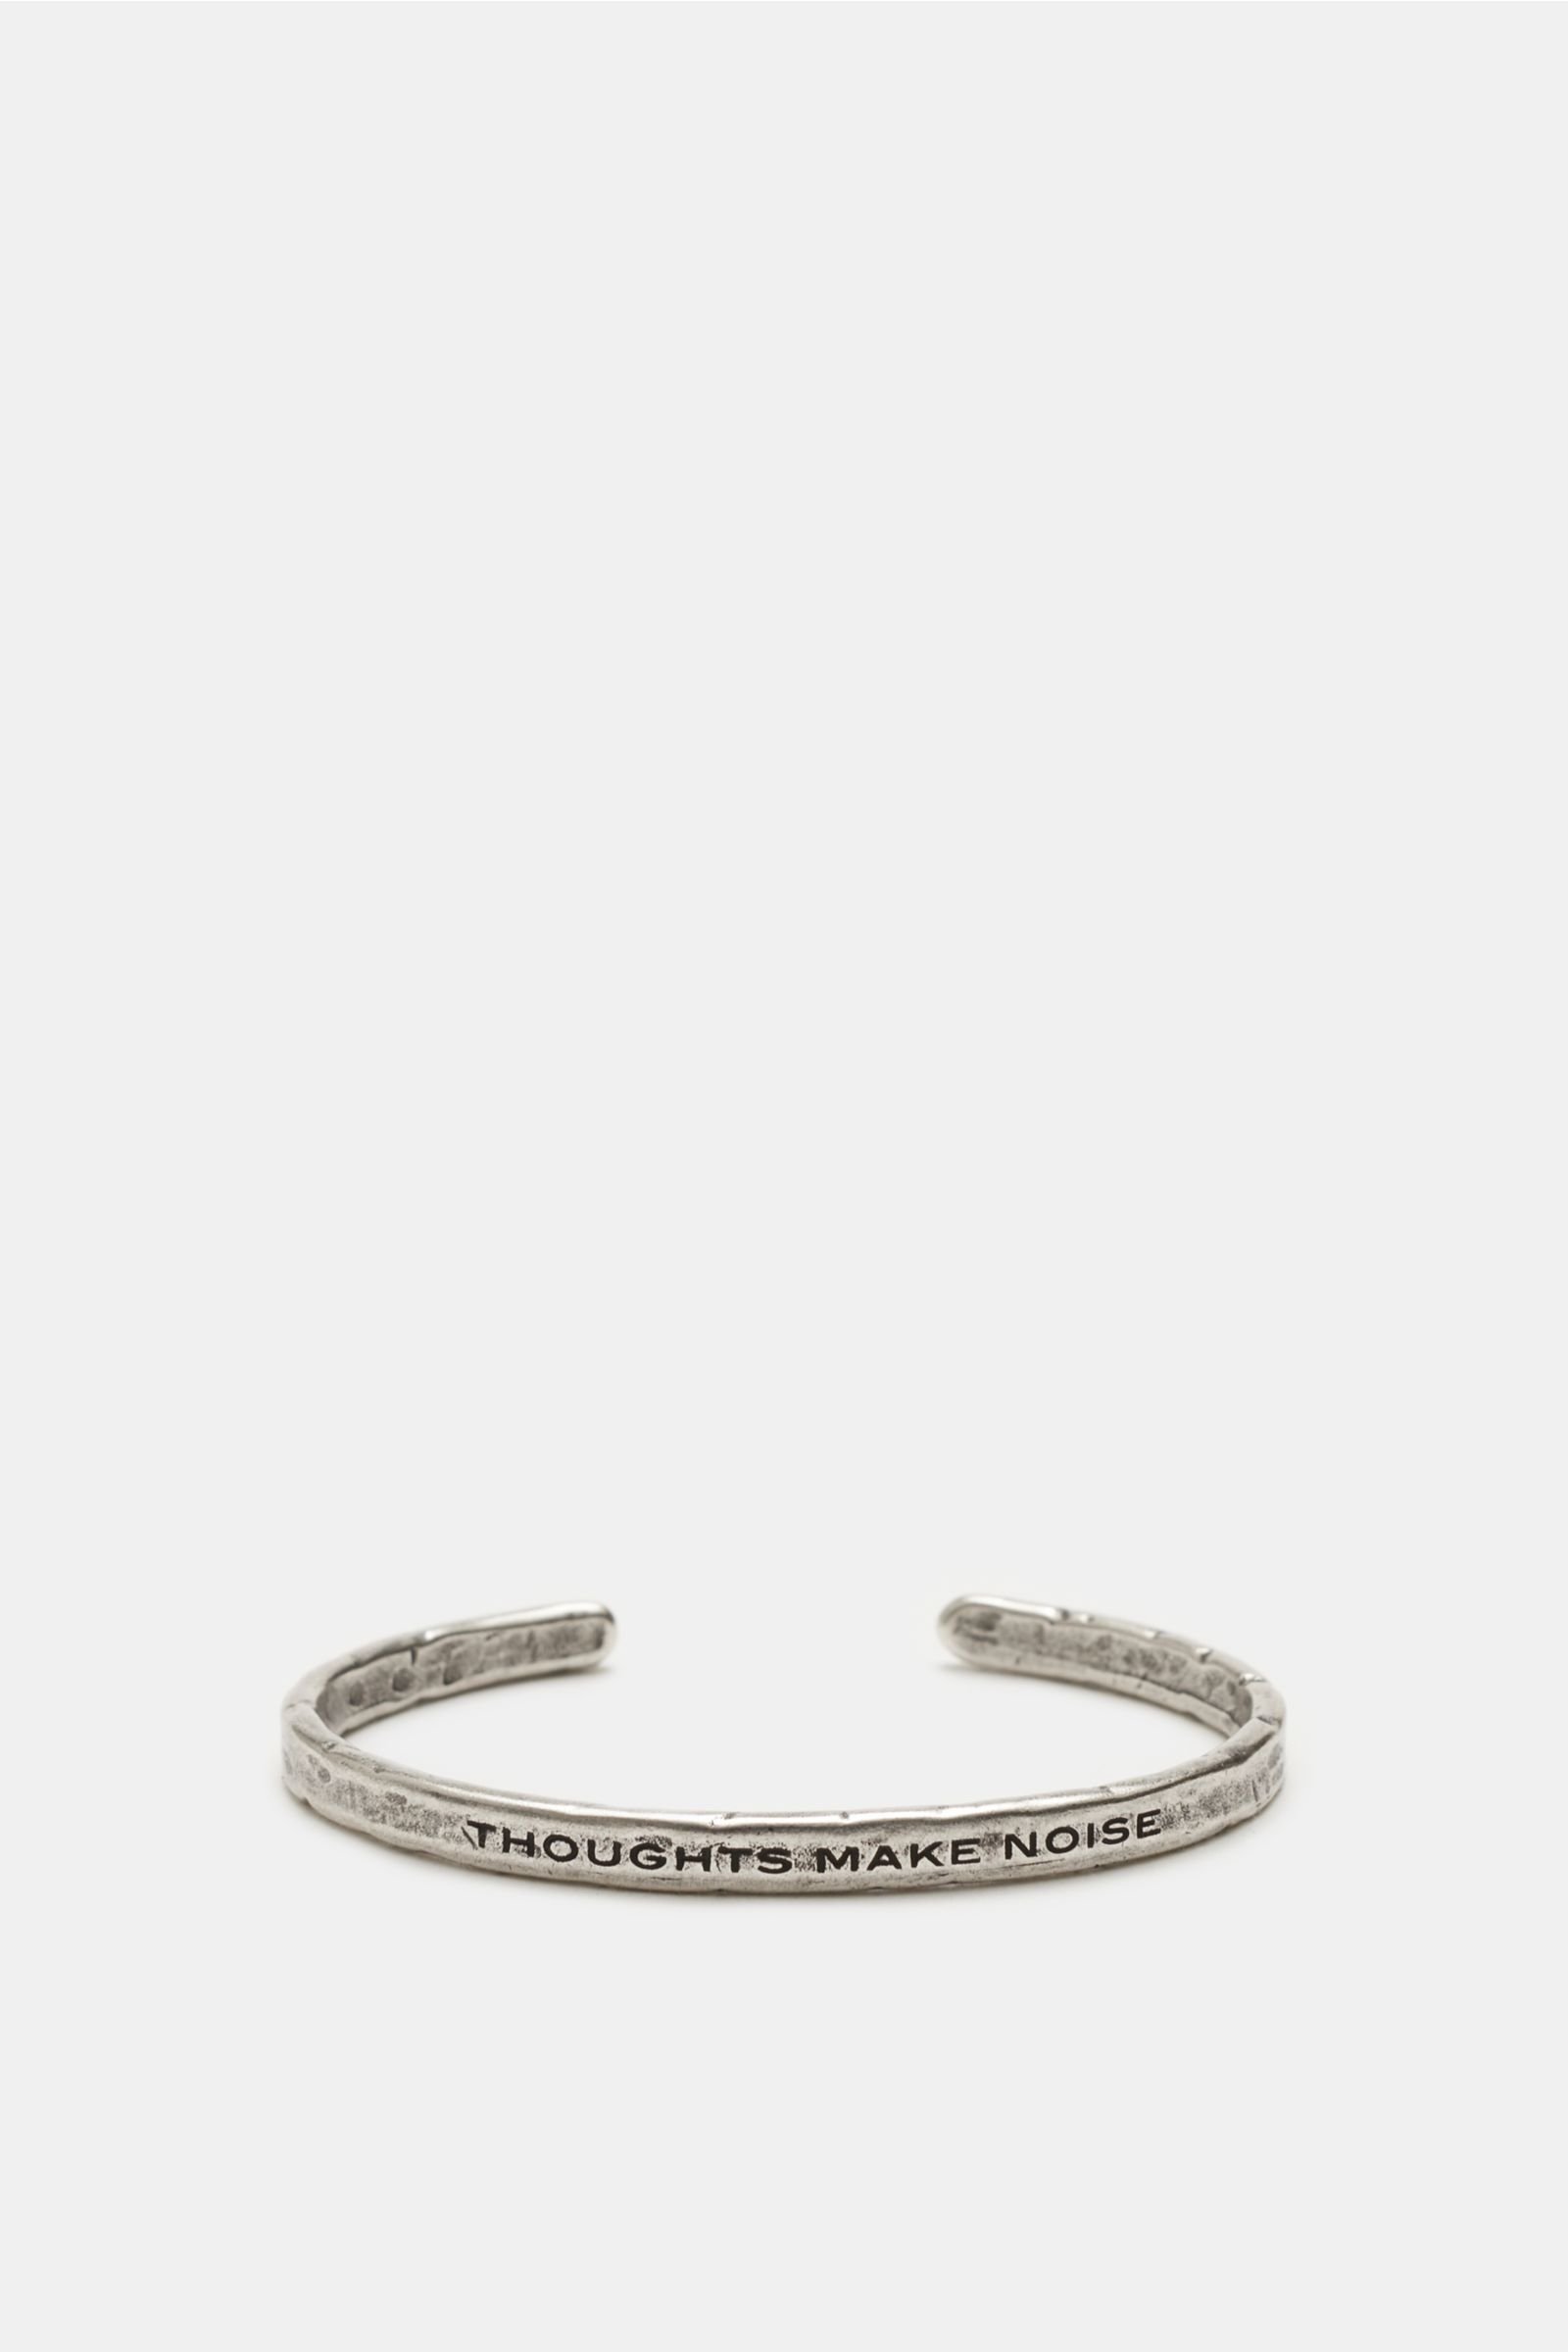 Armband 'Thoughts make noise' silber